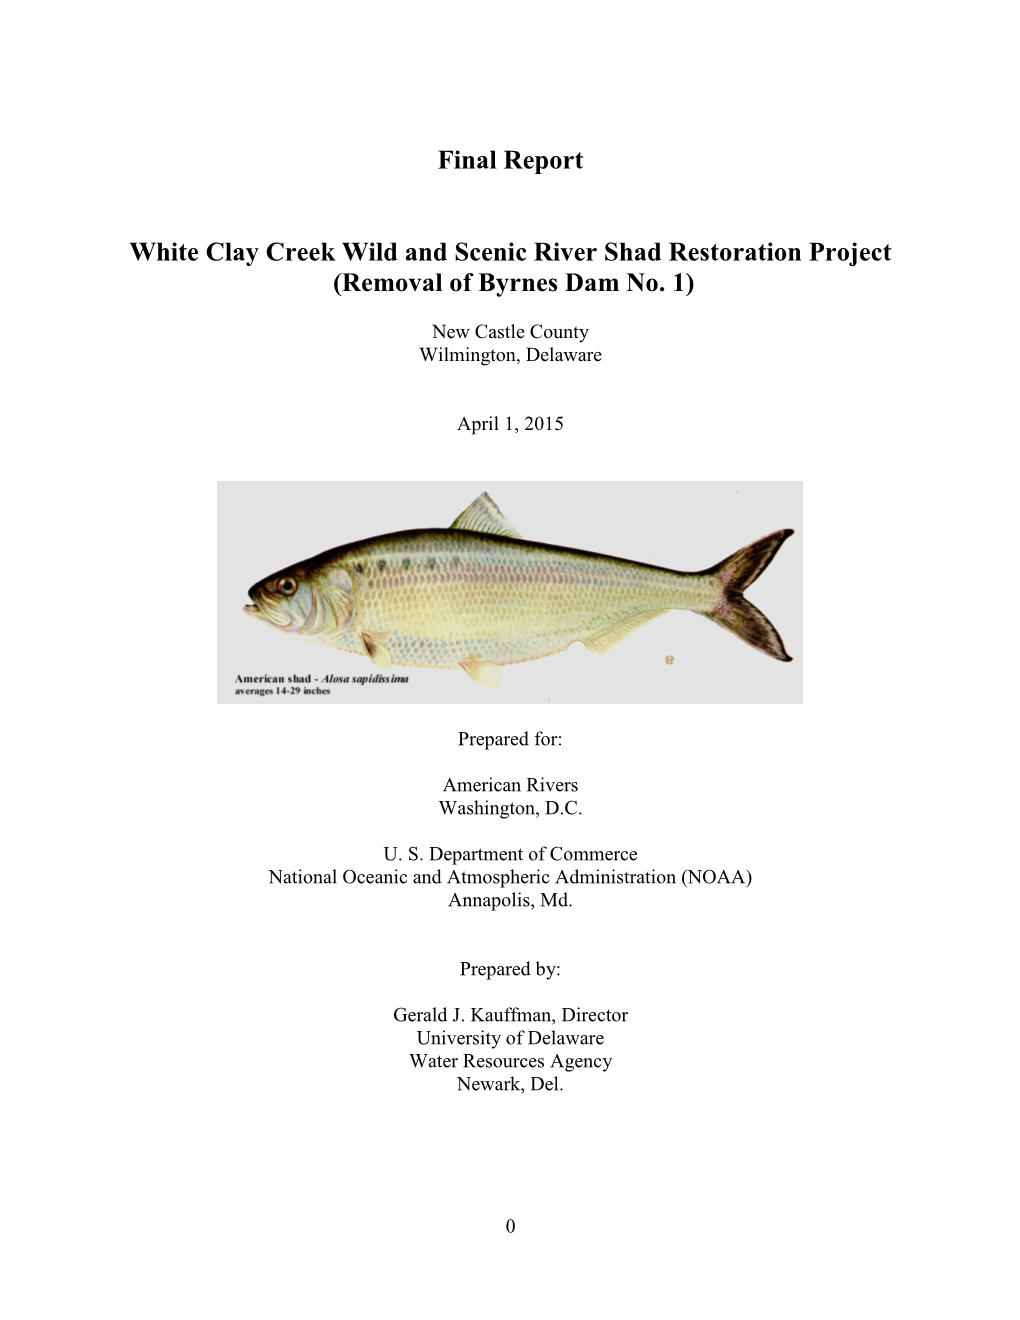 Final Report White Clay Creek Wild And